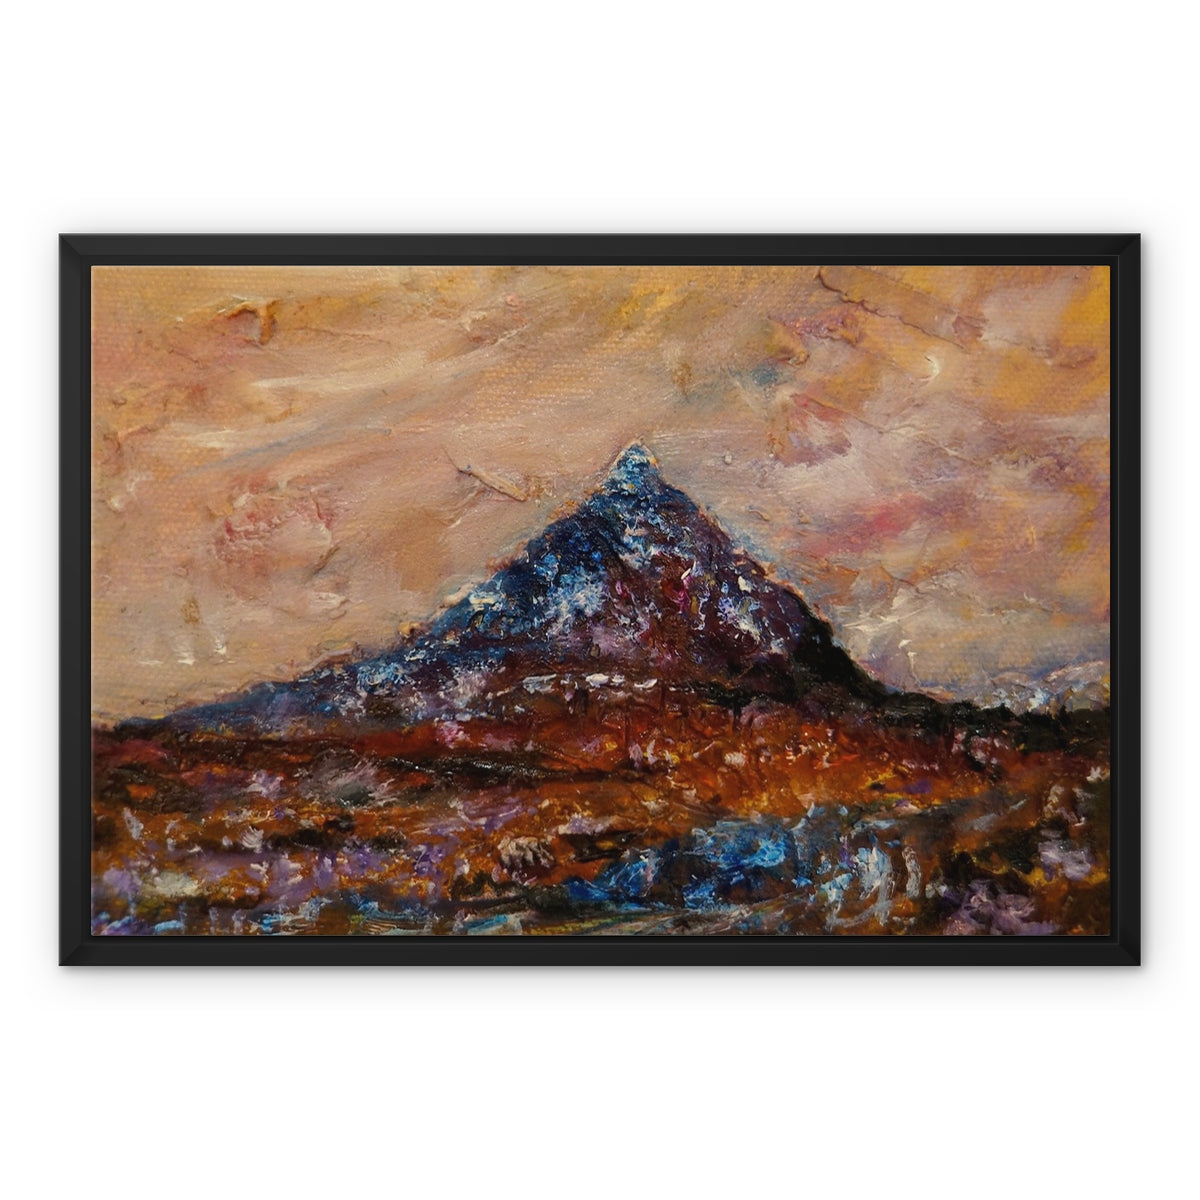 Buachaille Etive Mòr Painting | Framed Canvas From Scotland-Floating Framed Canvas Prints-Glencoe Art Gallery-24"x18"-Paintings, Prints, Homeware, Art Gifts From Scotland By Scottish Artist Kevin Hunter